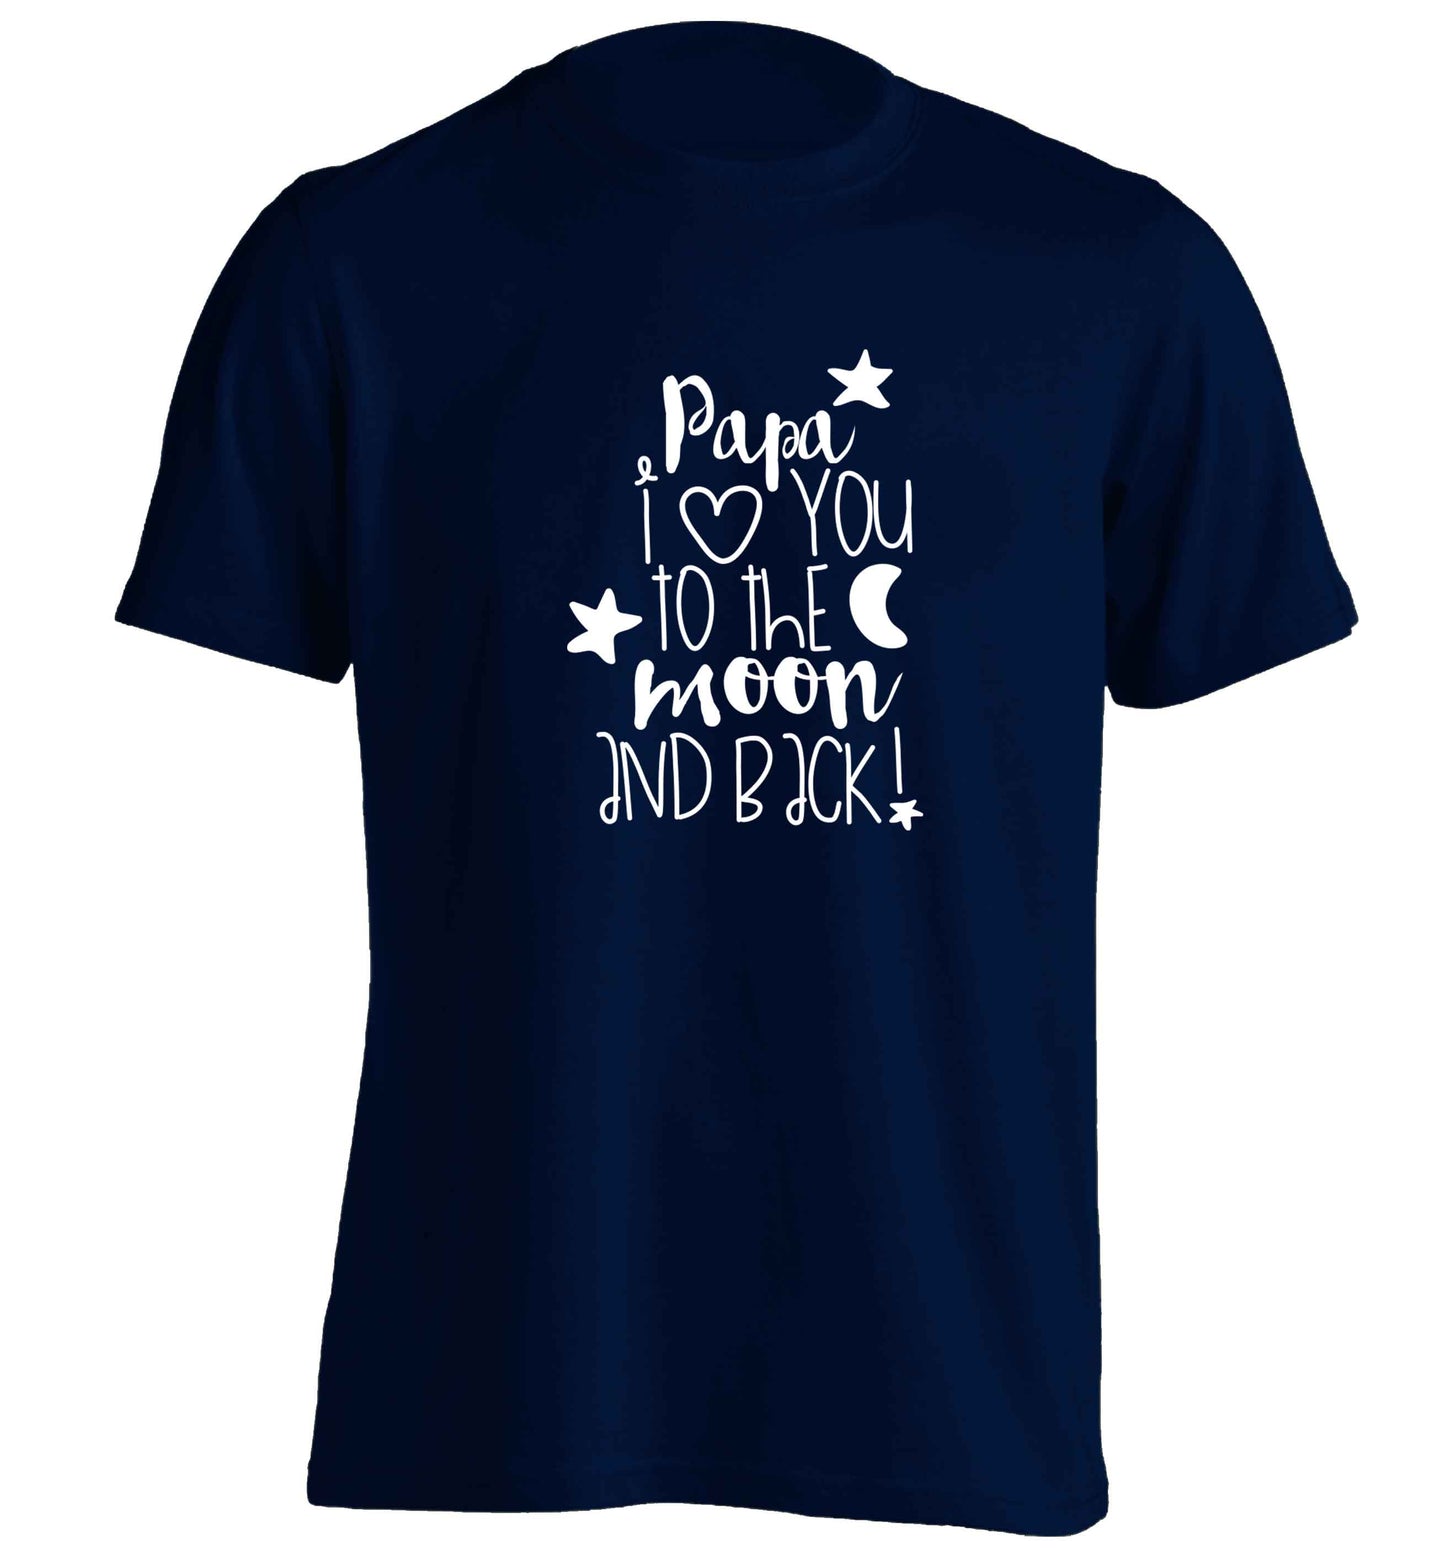 Papa I love you to the moon and back adults unisex navy Tshirt 2XL